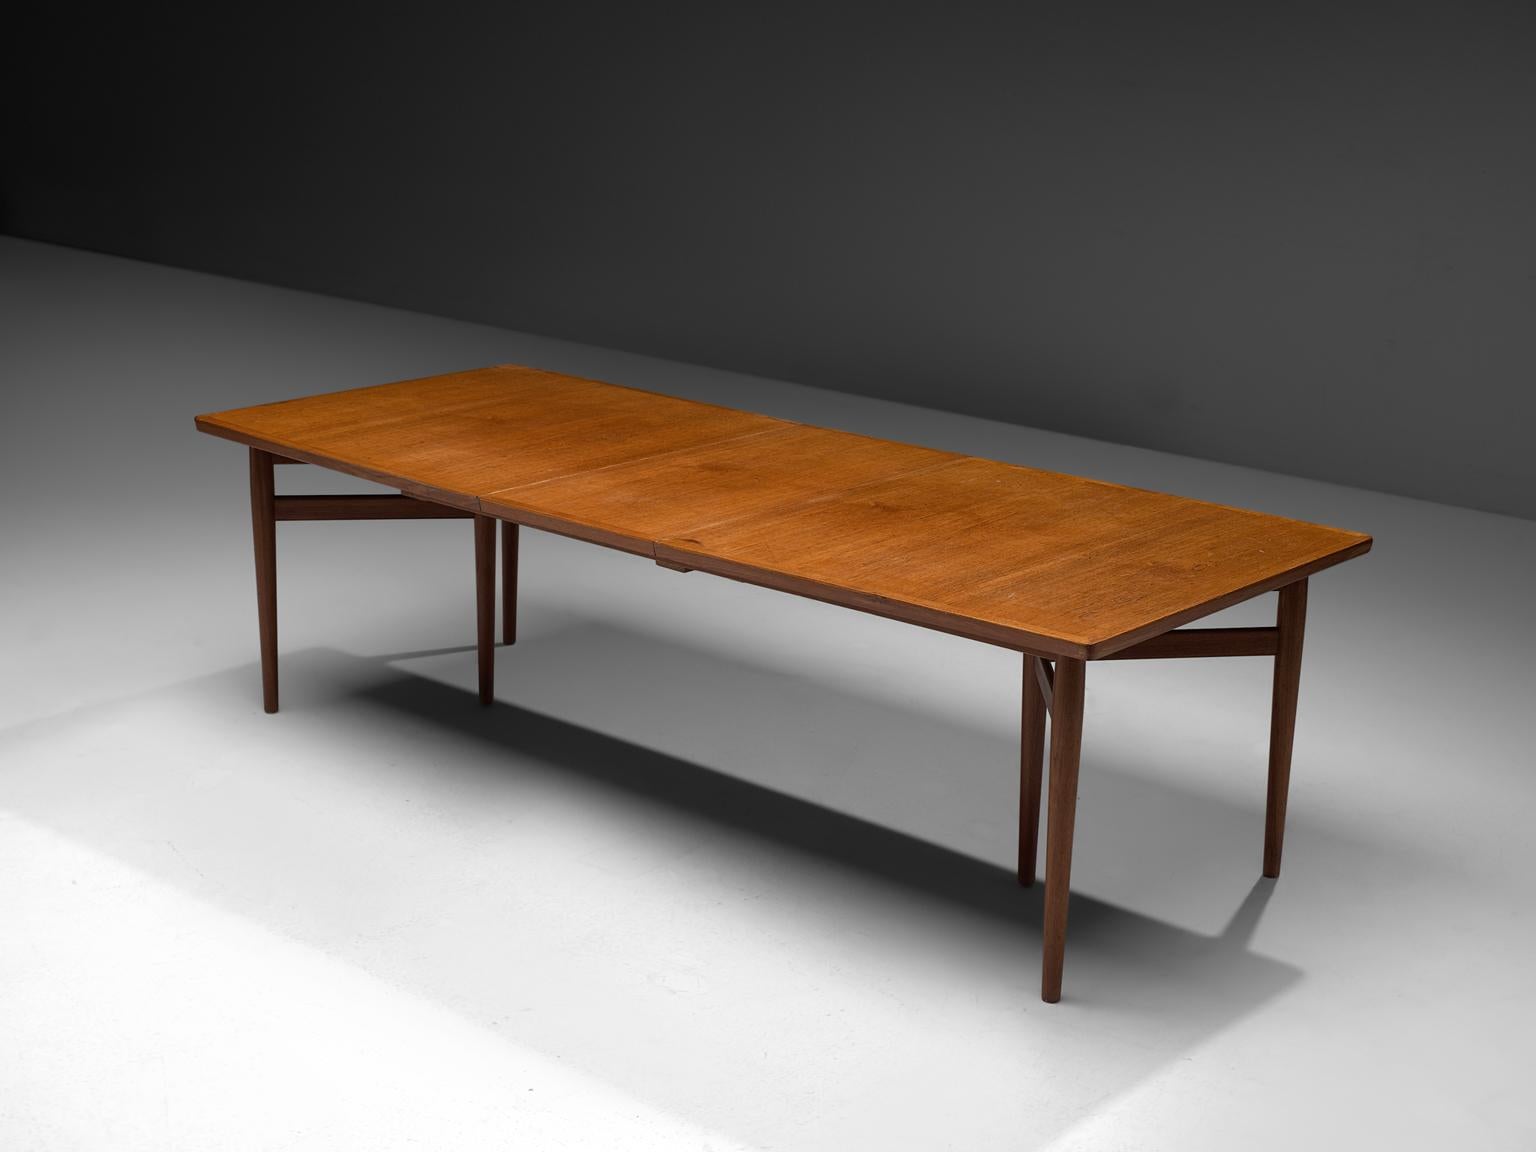 Arne Vodder, extendable dining table, teak, Denmark, 1960s. 

This large conference table by Arne Vodder is a true example of the combination of slender and architectural design with rounded colors and excellent material and craftsmanship. The